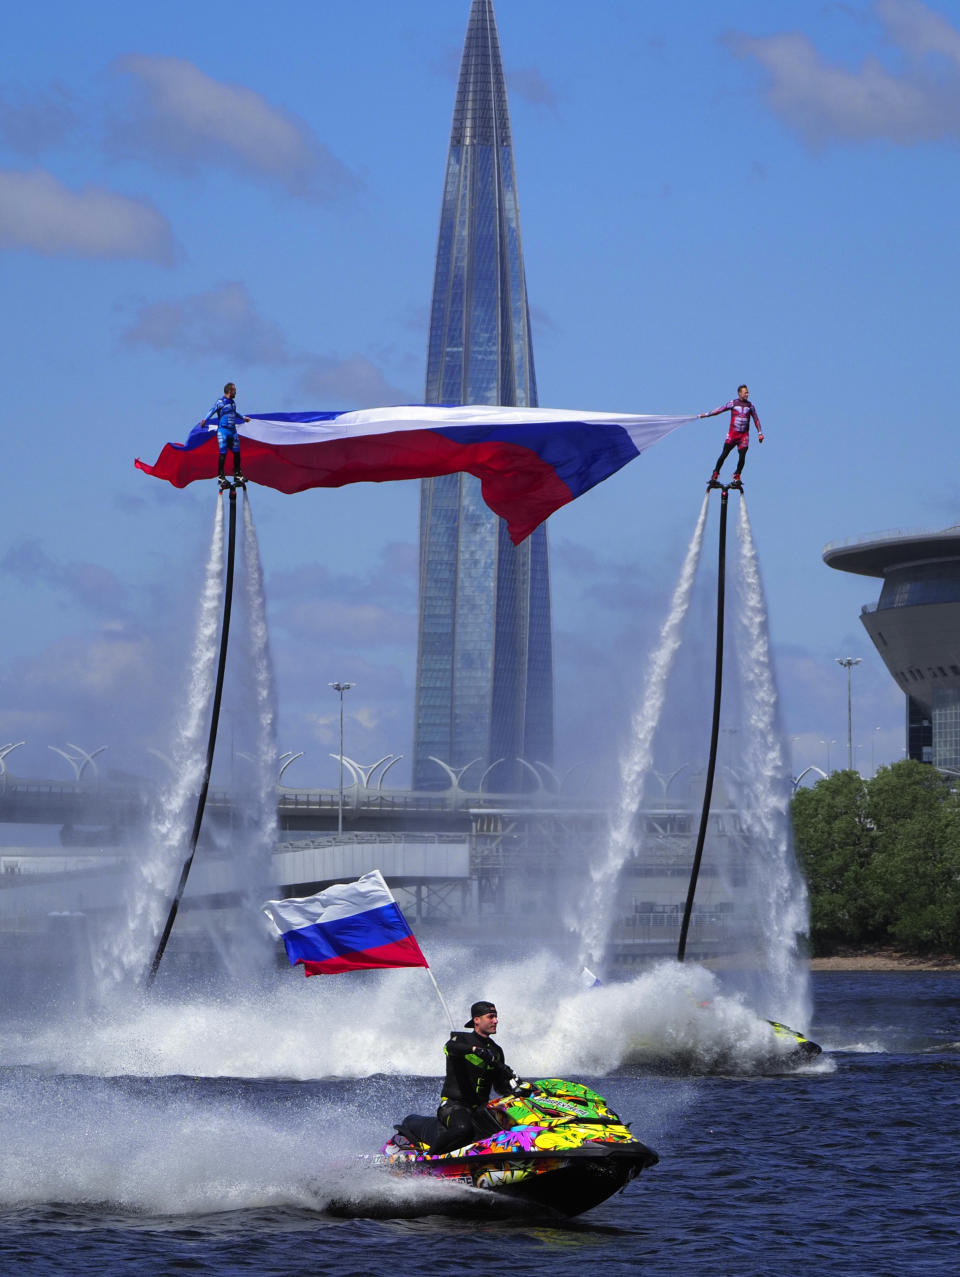 Members of the Russian hydroflight team hold the Russian national flag during the Day of Russia celebration in St.Petersburg, Russia, Friday, June 12, 2020, with business tower Lakhta Centre, the headquarters of Russian gas monopoly Gazprom in the background. (AP Photo/Dmitri Lovetsky)